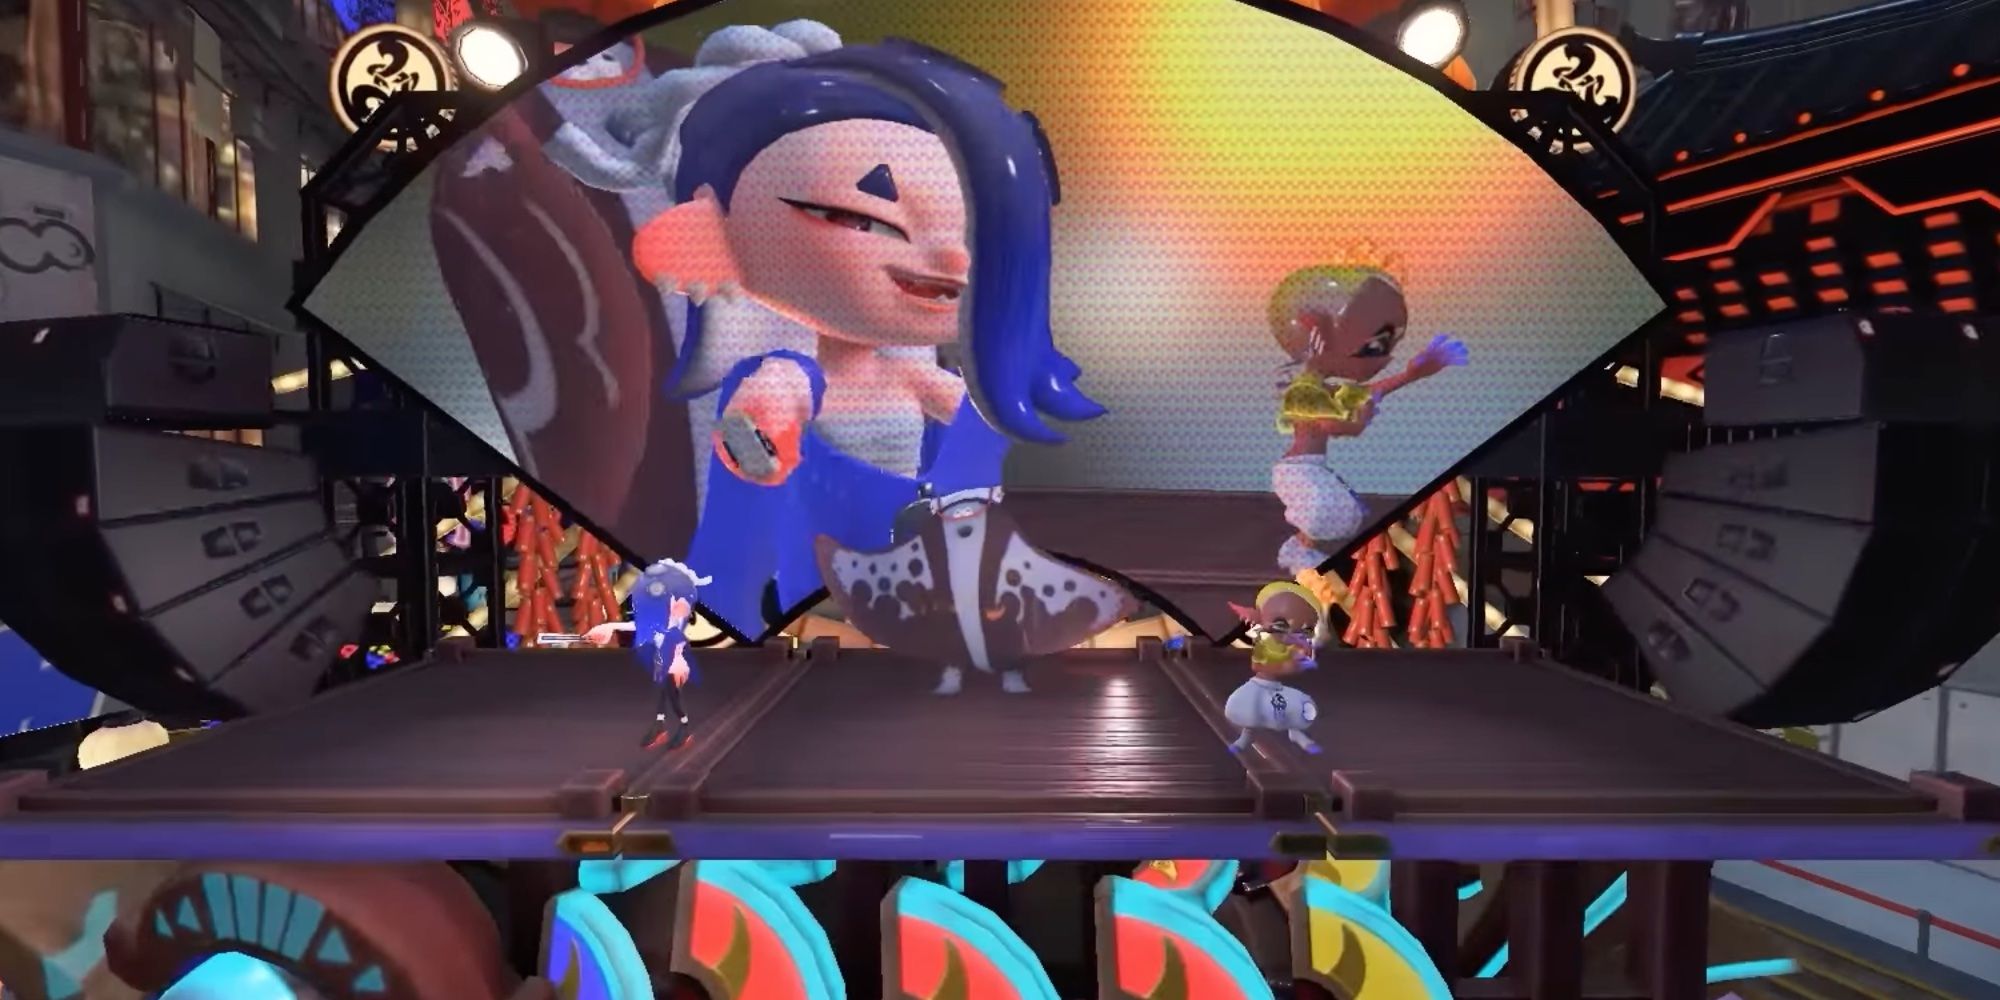 Deep Cut from Splatoon 3 featuring Shiver, Frye, and Big Man